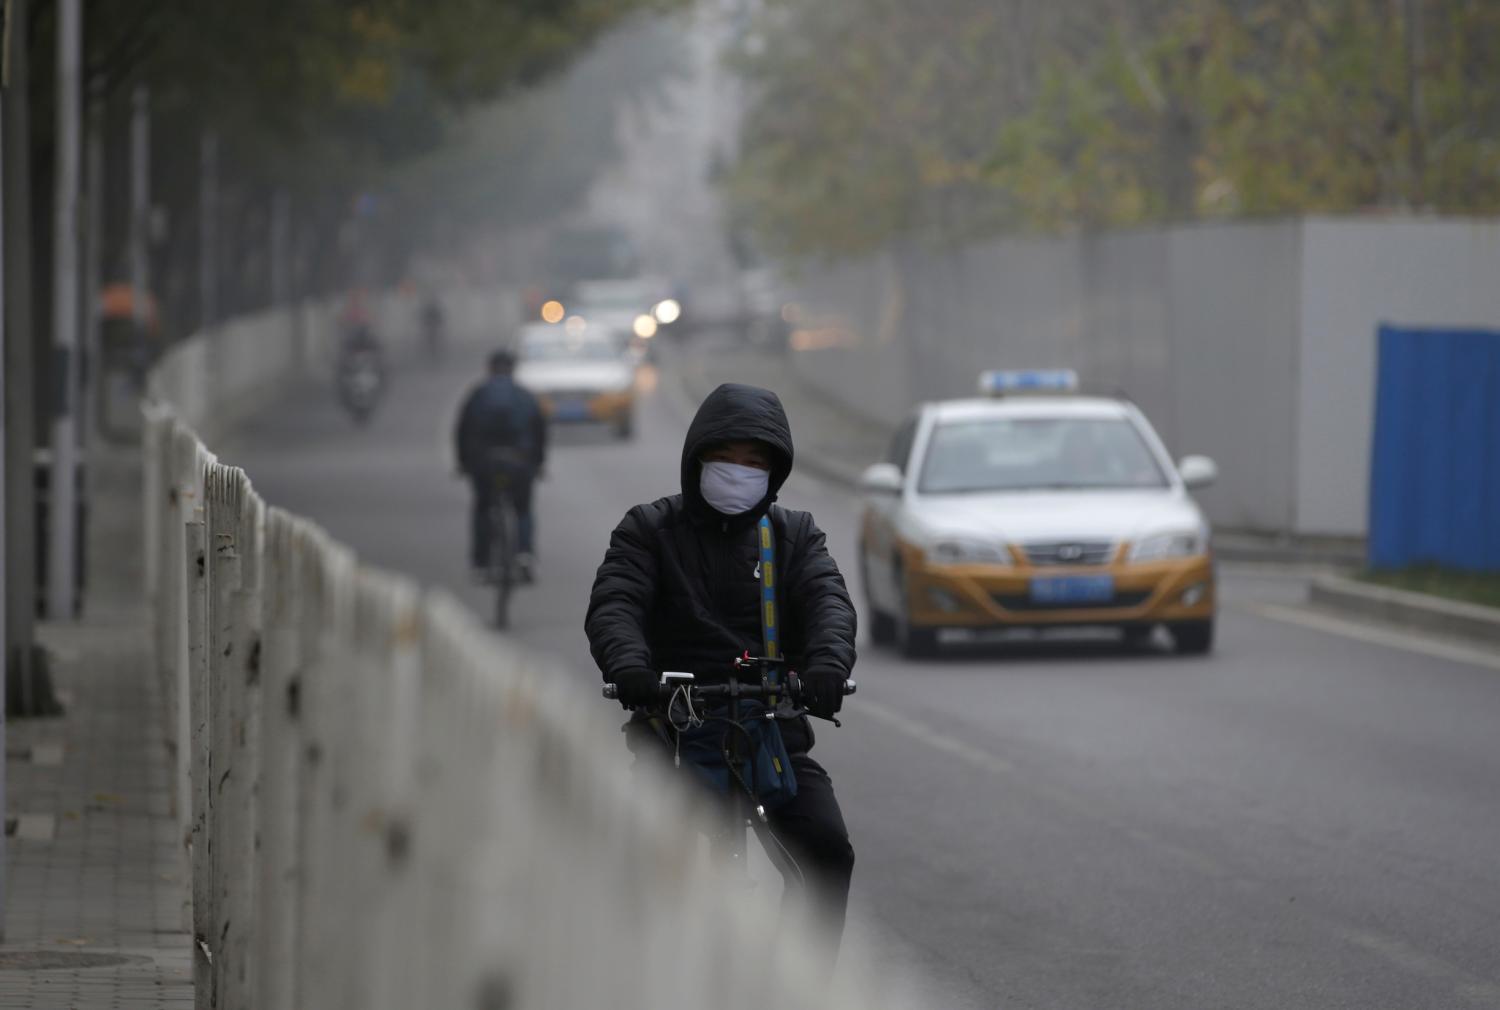 A man wearing a mask cycles on a road on a polluted day after a yellow alert was issued for smog in Beijing, China, November 14, 2018. REUTERS/Jason Lee - RC1FBD108B00